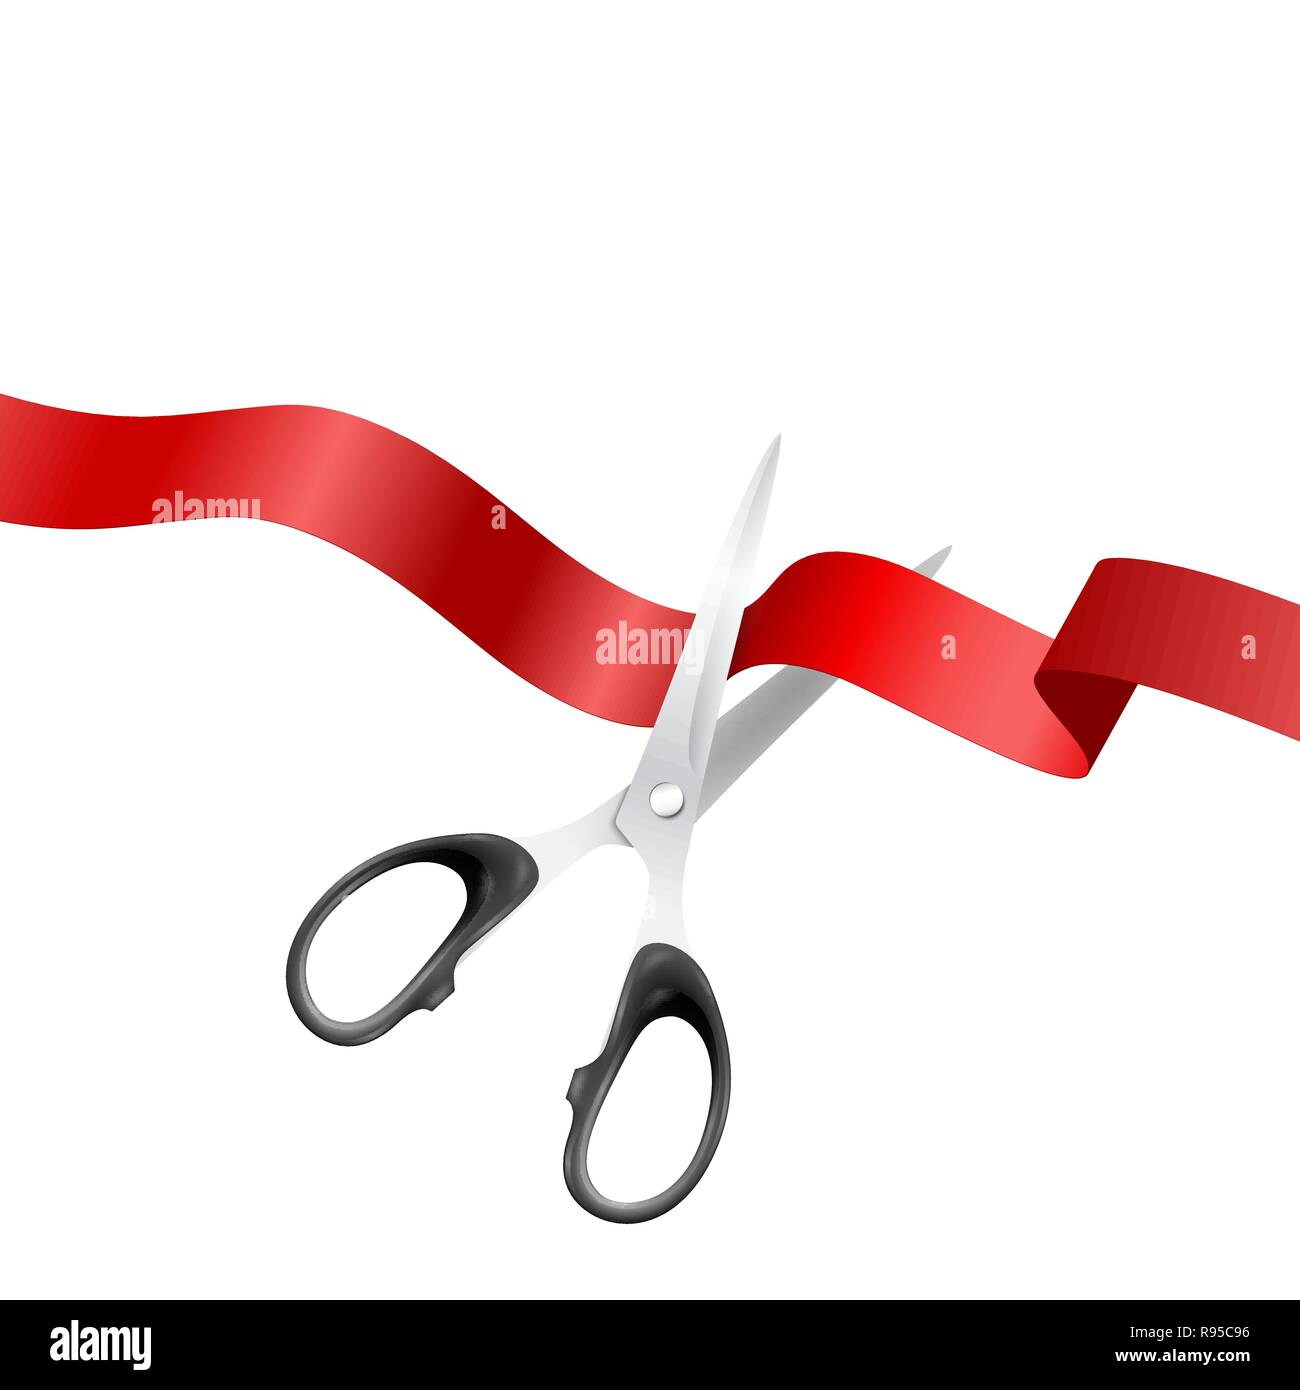 Grand Opening Background with Realistic Metal Silver Scissors and Red Ribbon Closeup Isolated on White Background. Design Template of Classic Scissors Cutting Red Ribbon Banner for Opening Ceremony Stock Vector